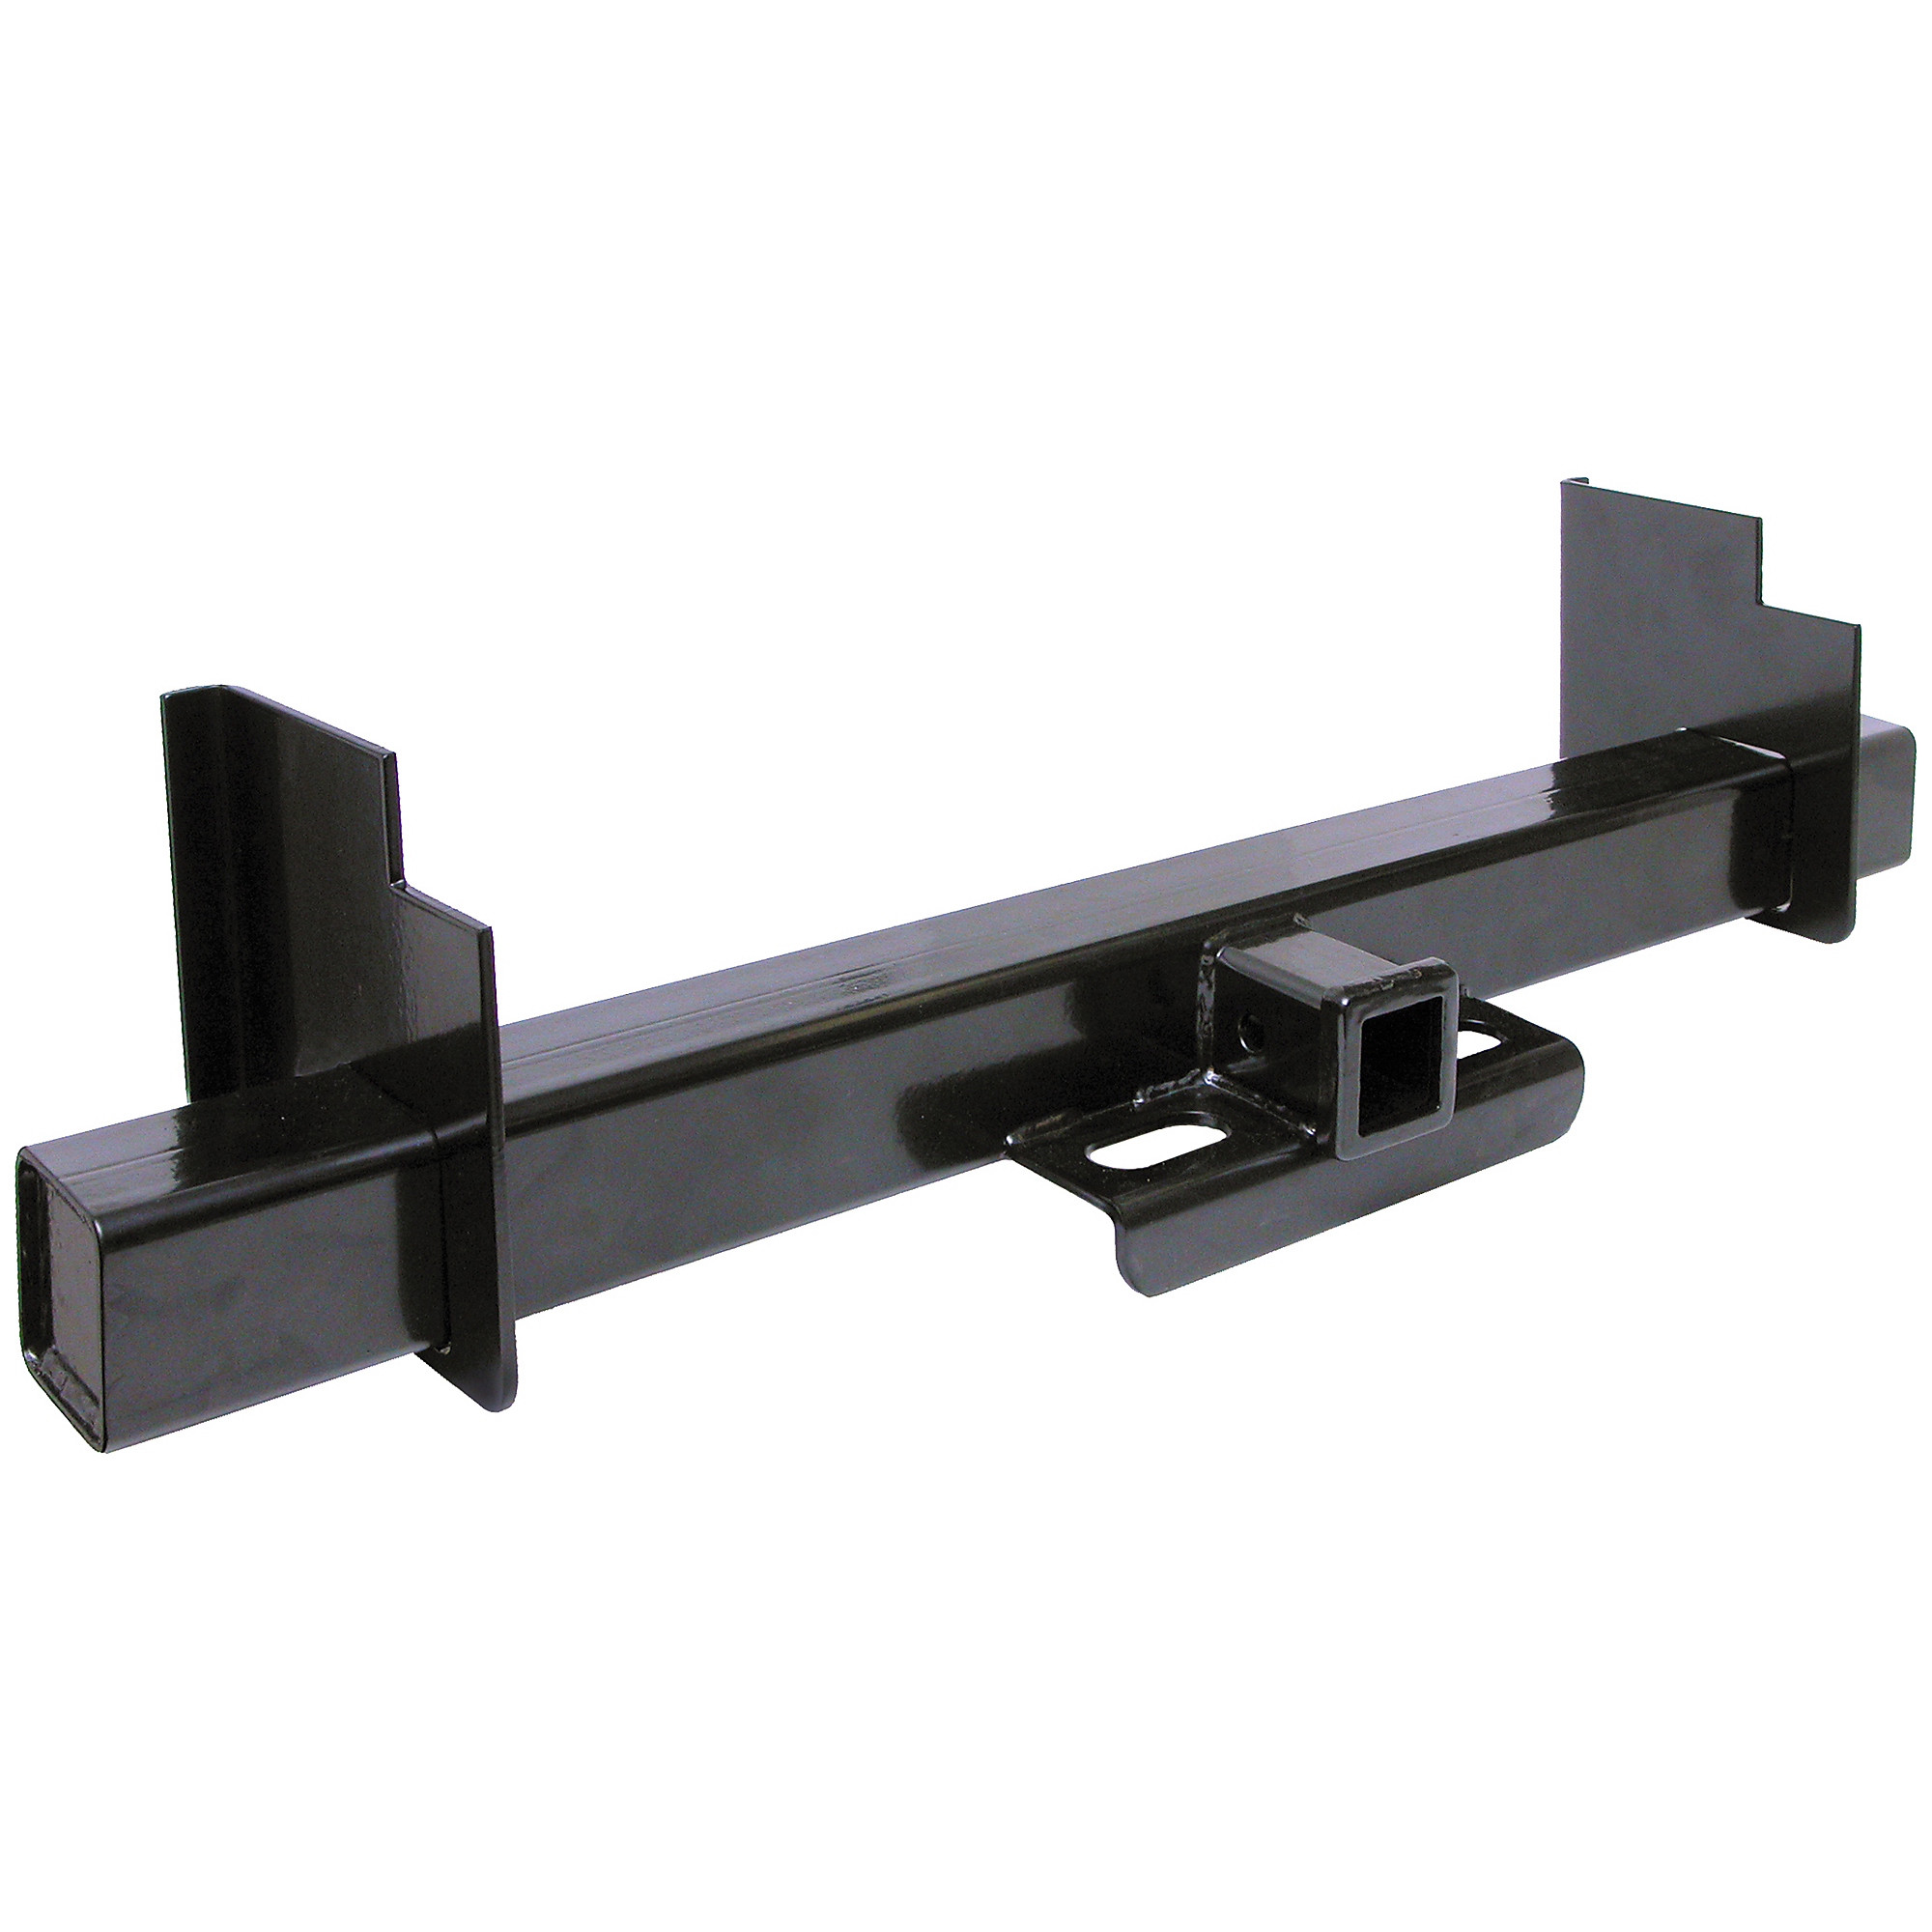 Buyers Products Class 5 44Inch Hitch Receiver, 2.5Inch Receiver, 9Inch Plates, Carbon Steel, 20,000lb. Max. Capacity, Model 1801052